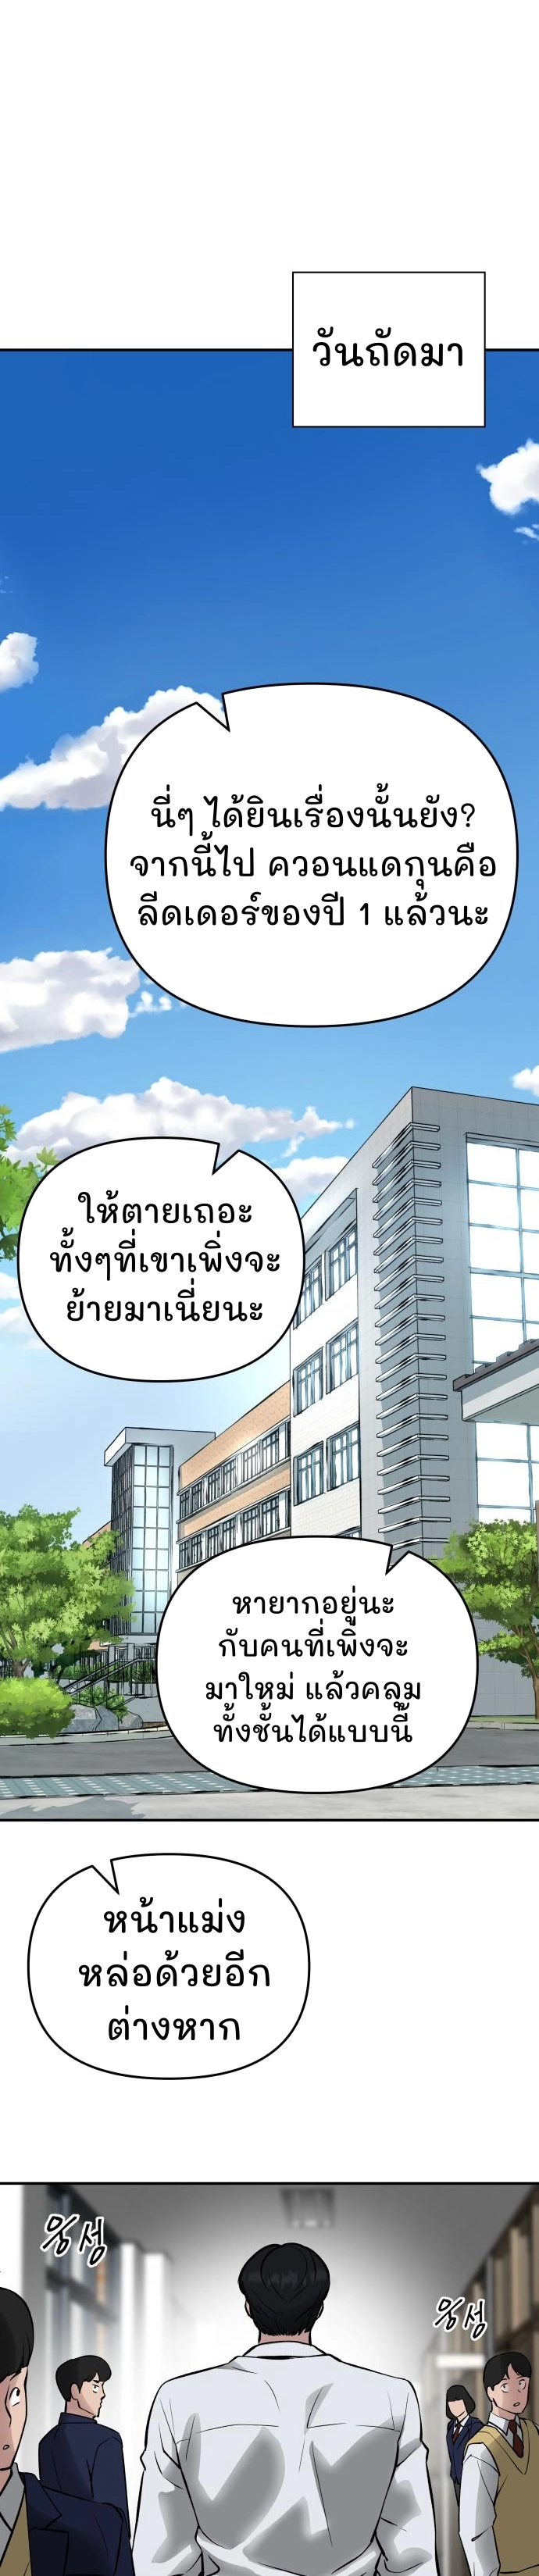 The Bully In-Charge ตอนที่ 47